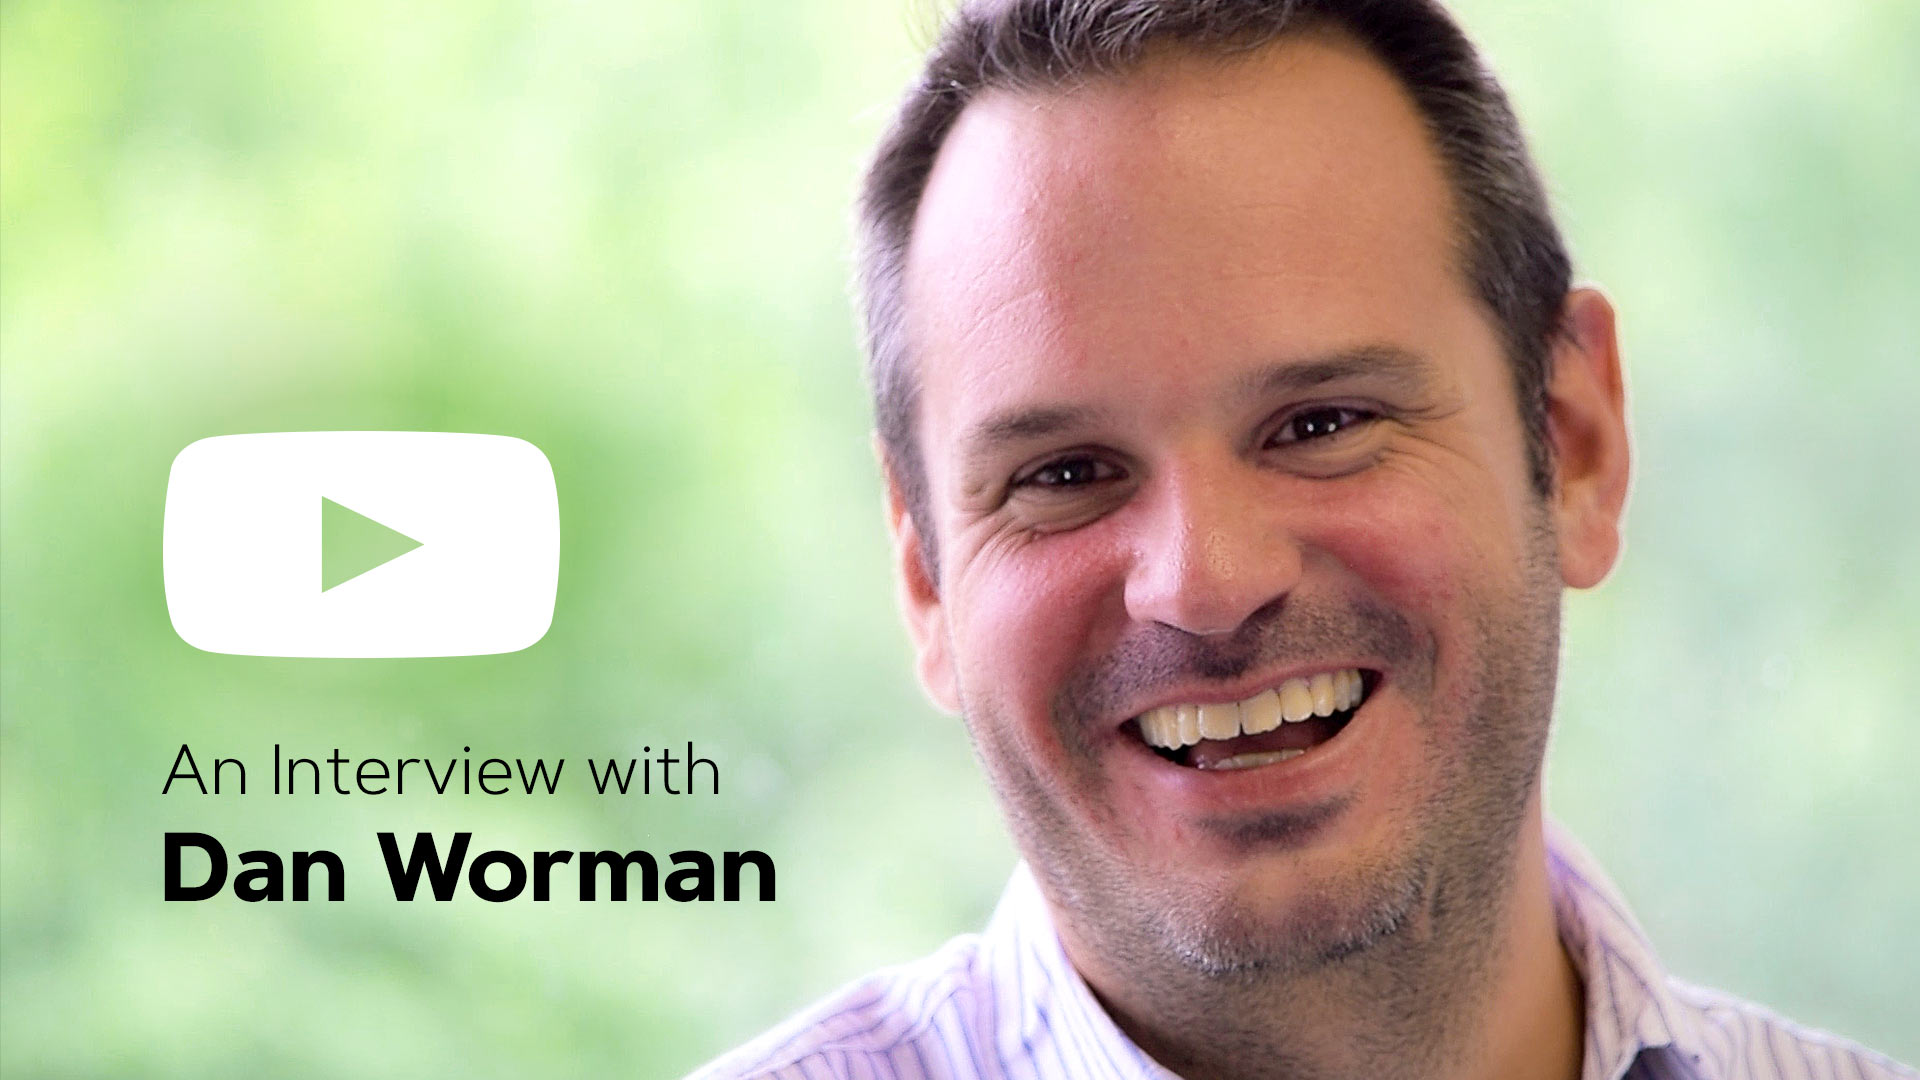 Cinos Mobile: An interview with Dan Worman